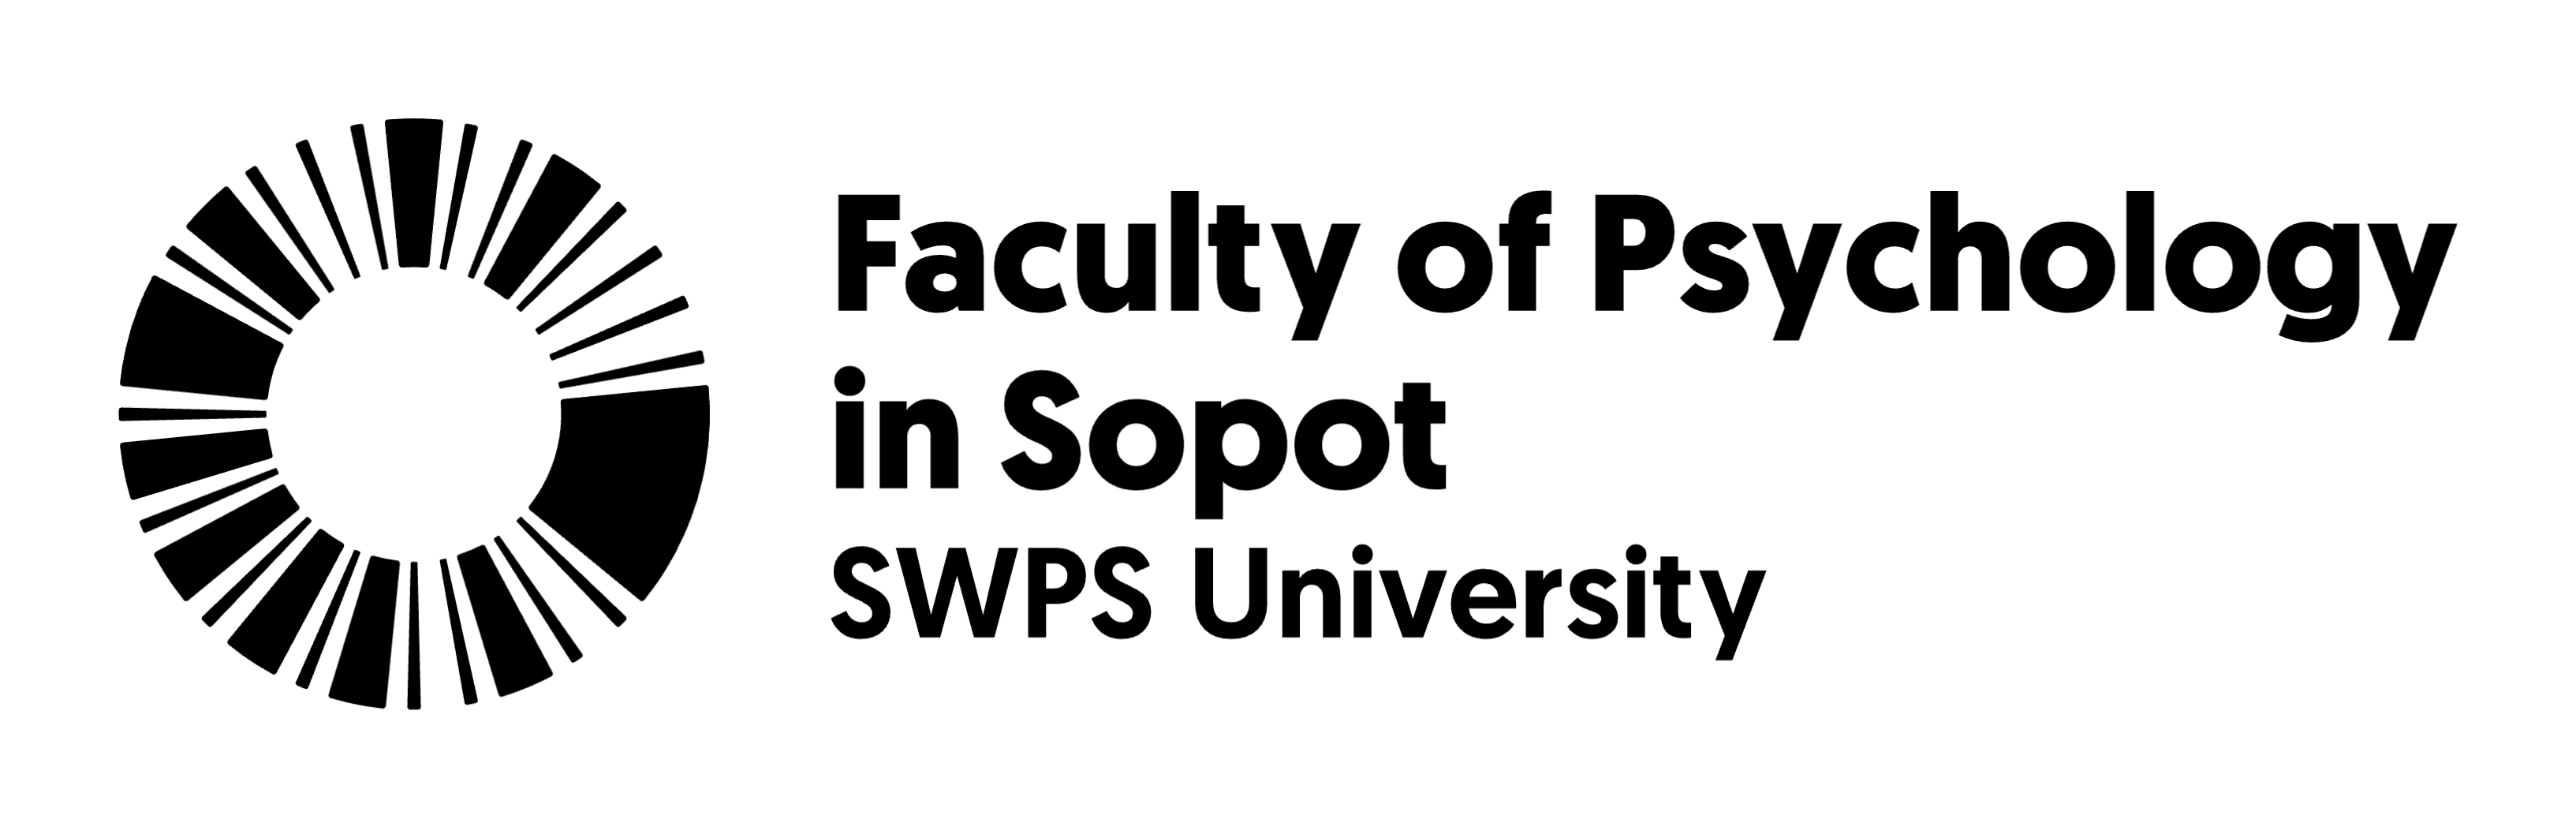 Logo of the Faculty of Psychology in Sopot